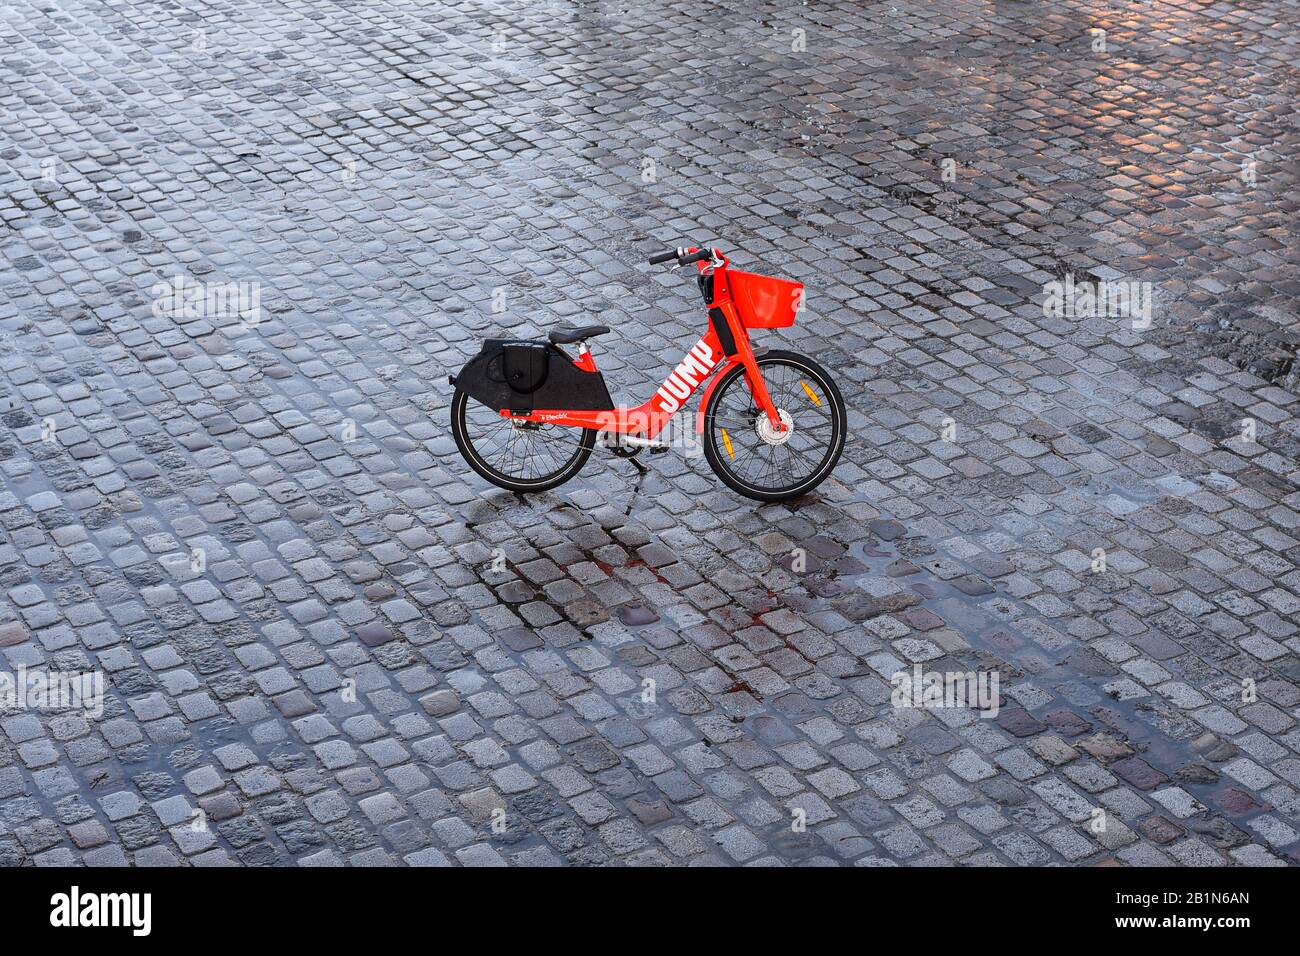 PARIS, FRANCE - FEBRUARY 26, 2020:  JUMP red dockless electric bike acquired by Uber parked ditched right in the middle of a wet cobblestoned place. Stock Photo